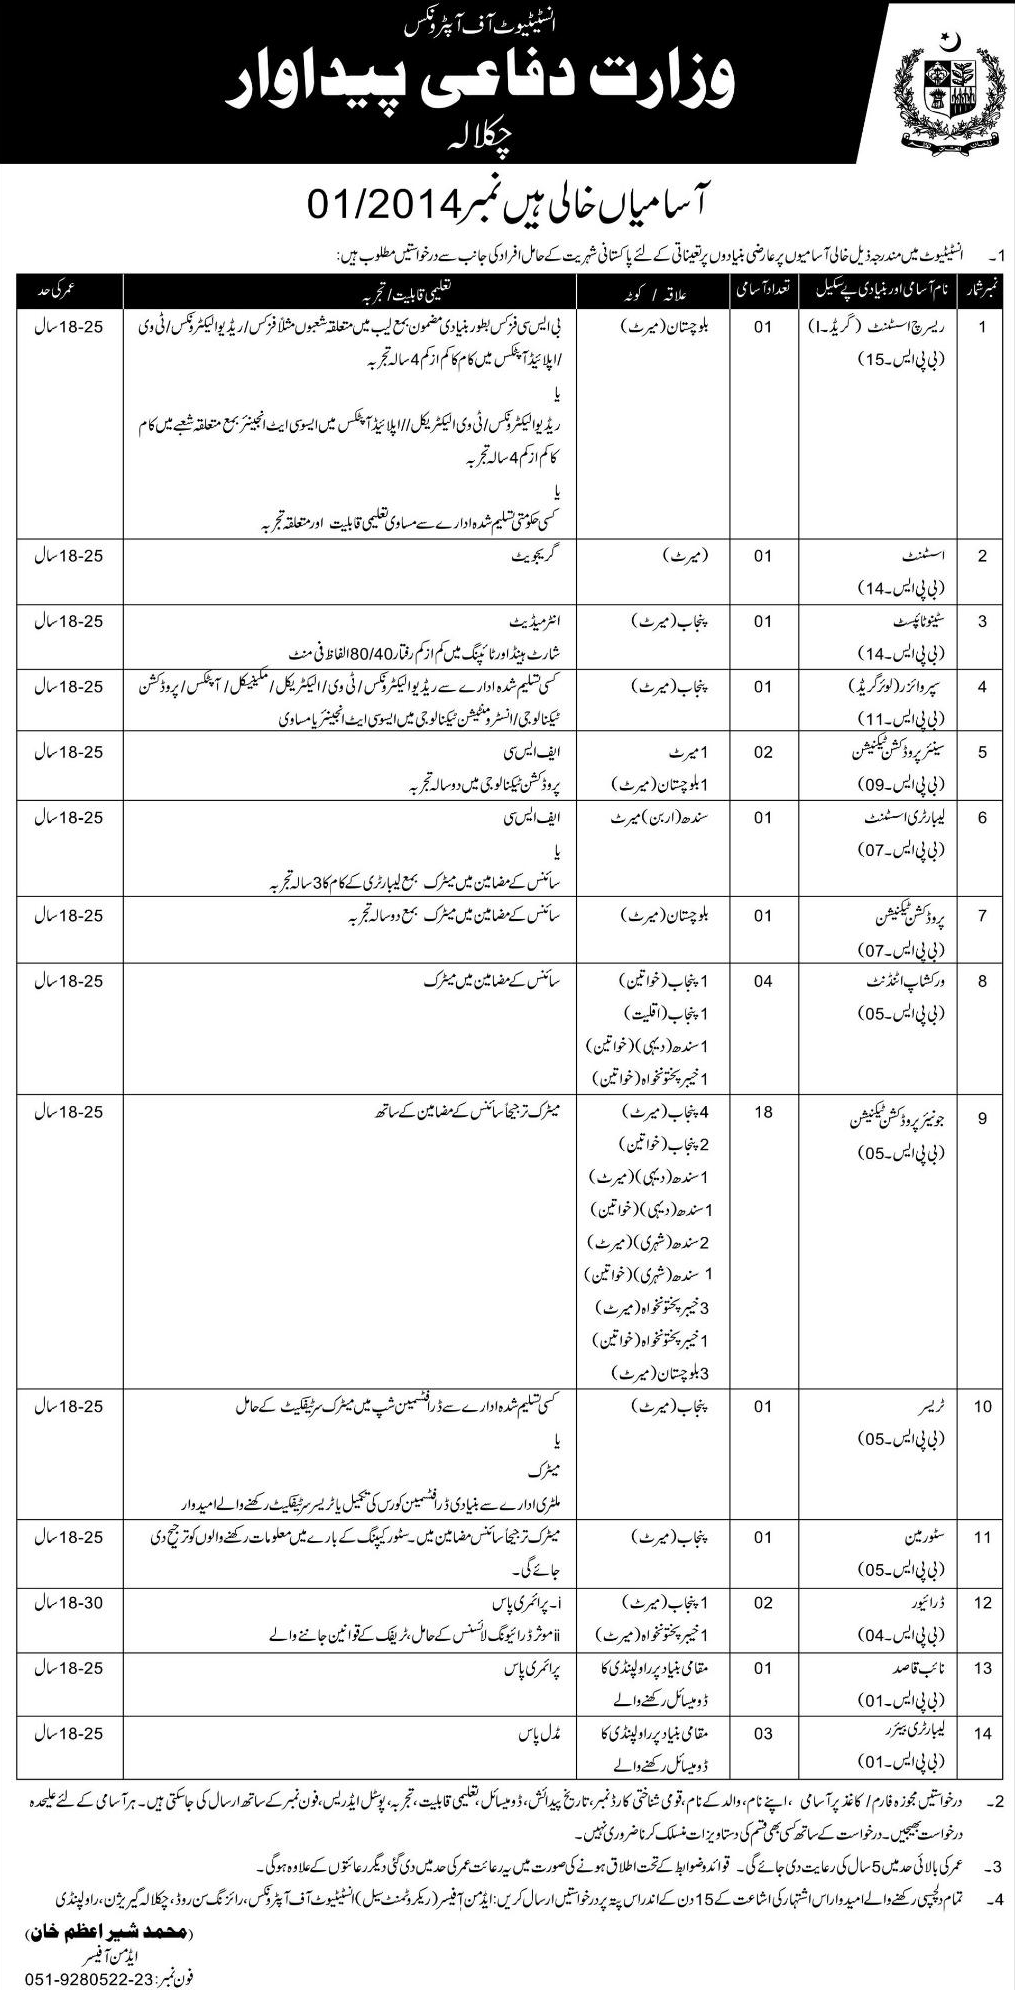 Ministry Of Defence Production Chaklala Pakistan Jobs 2015